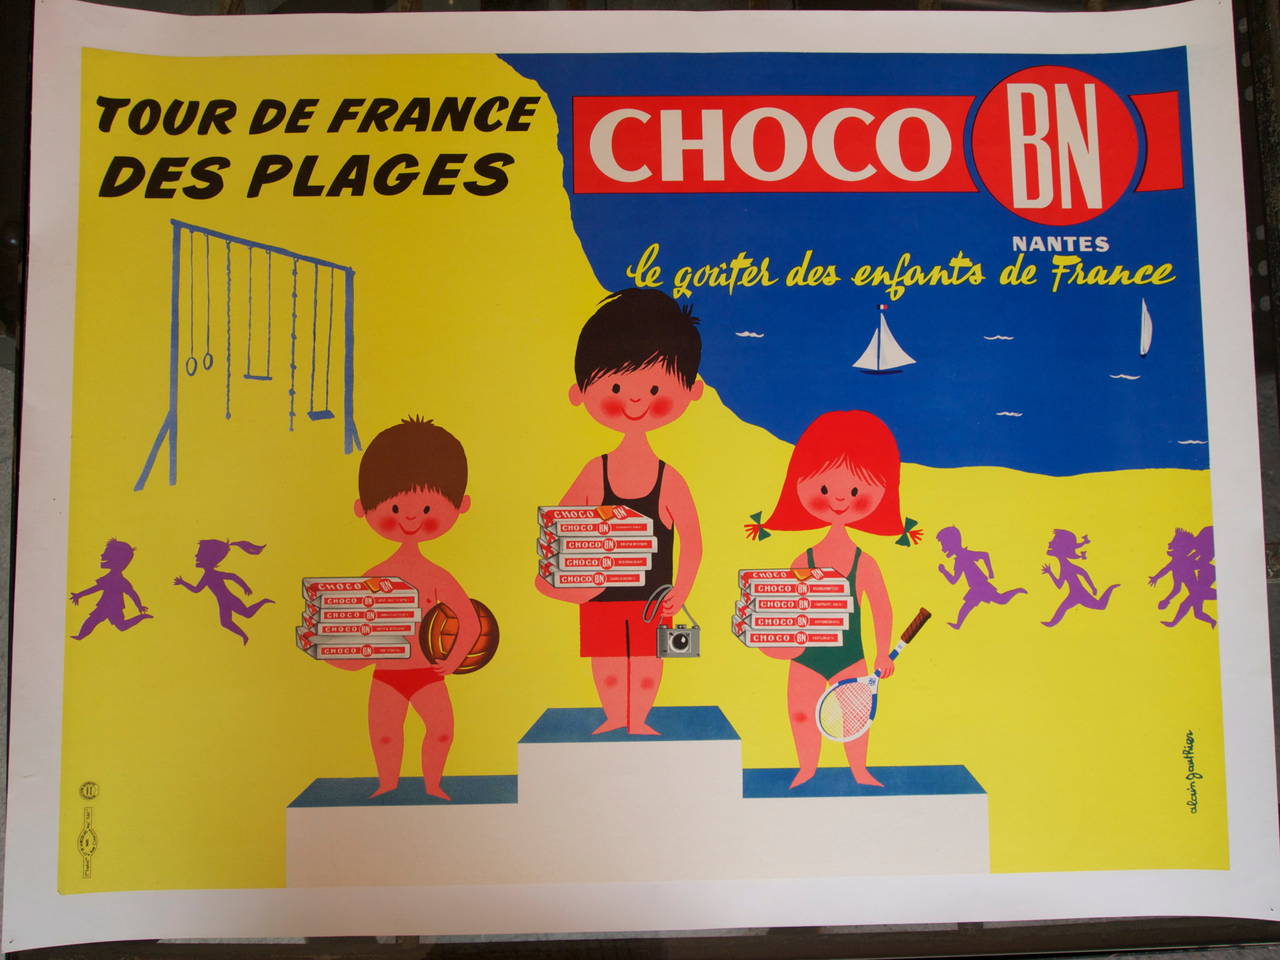 French advertising poster printed and edited in Paris promoting the famous French biscuits Choco BN,  with wonderful graphics